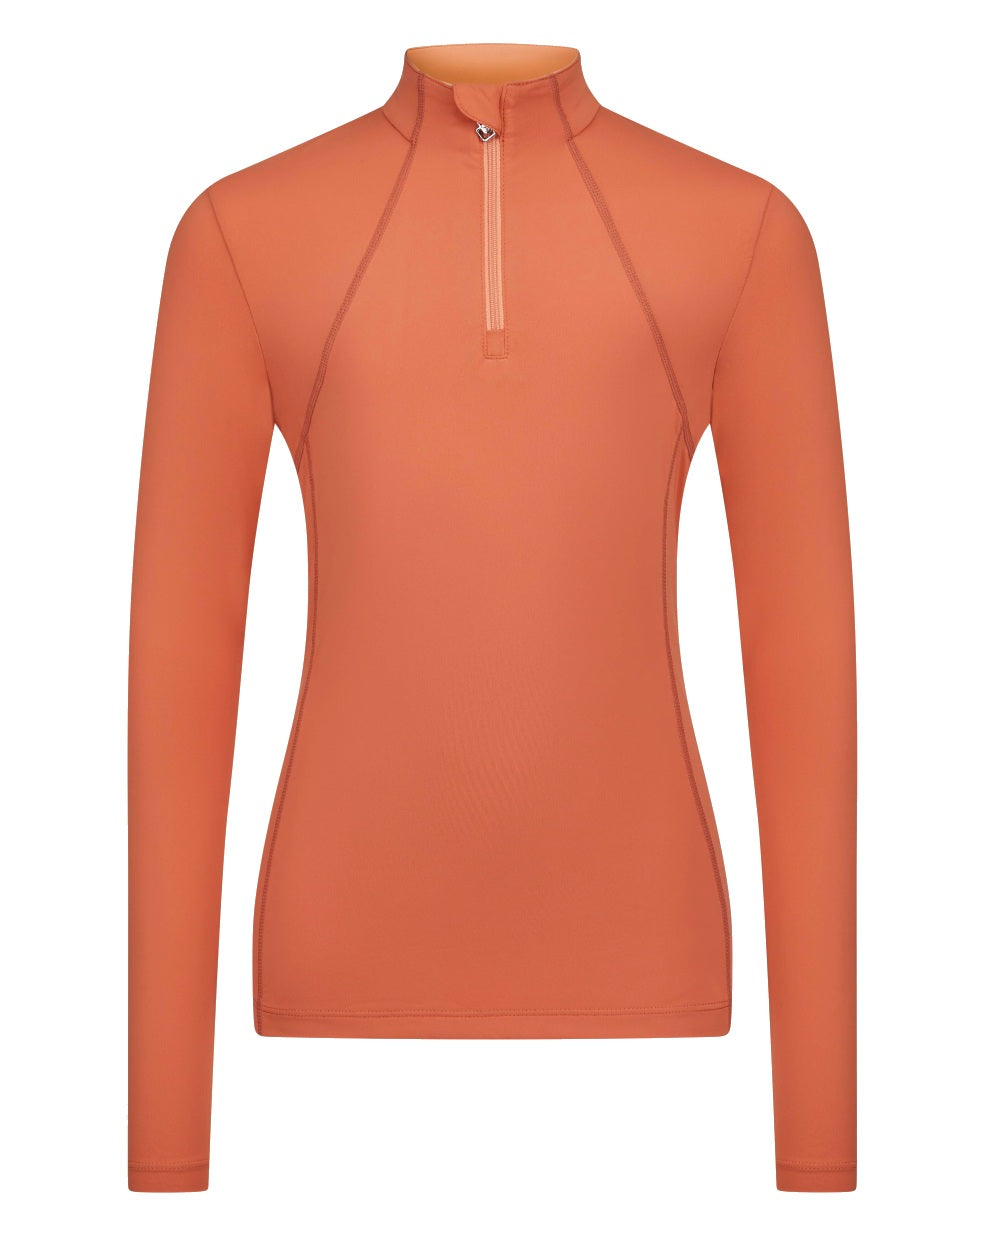 Apricot coloured LeMieux Young Rider Base Layer on white background 